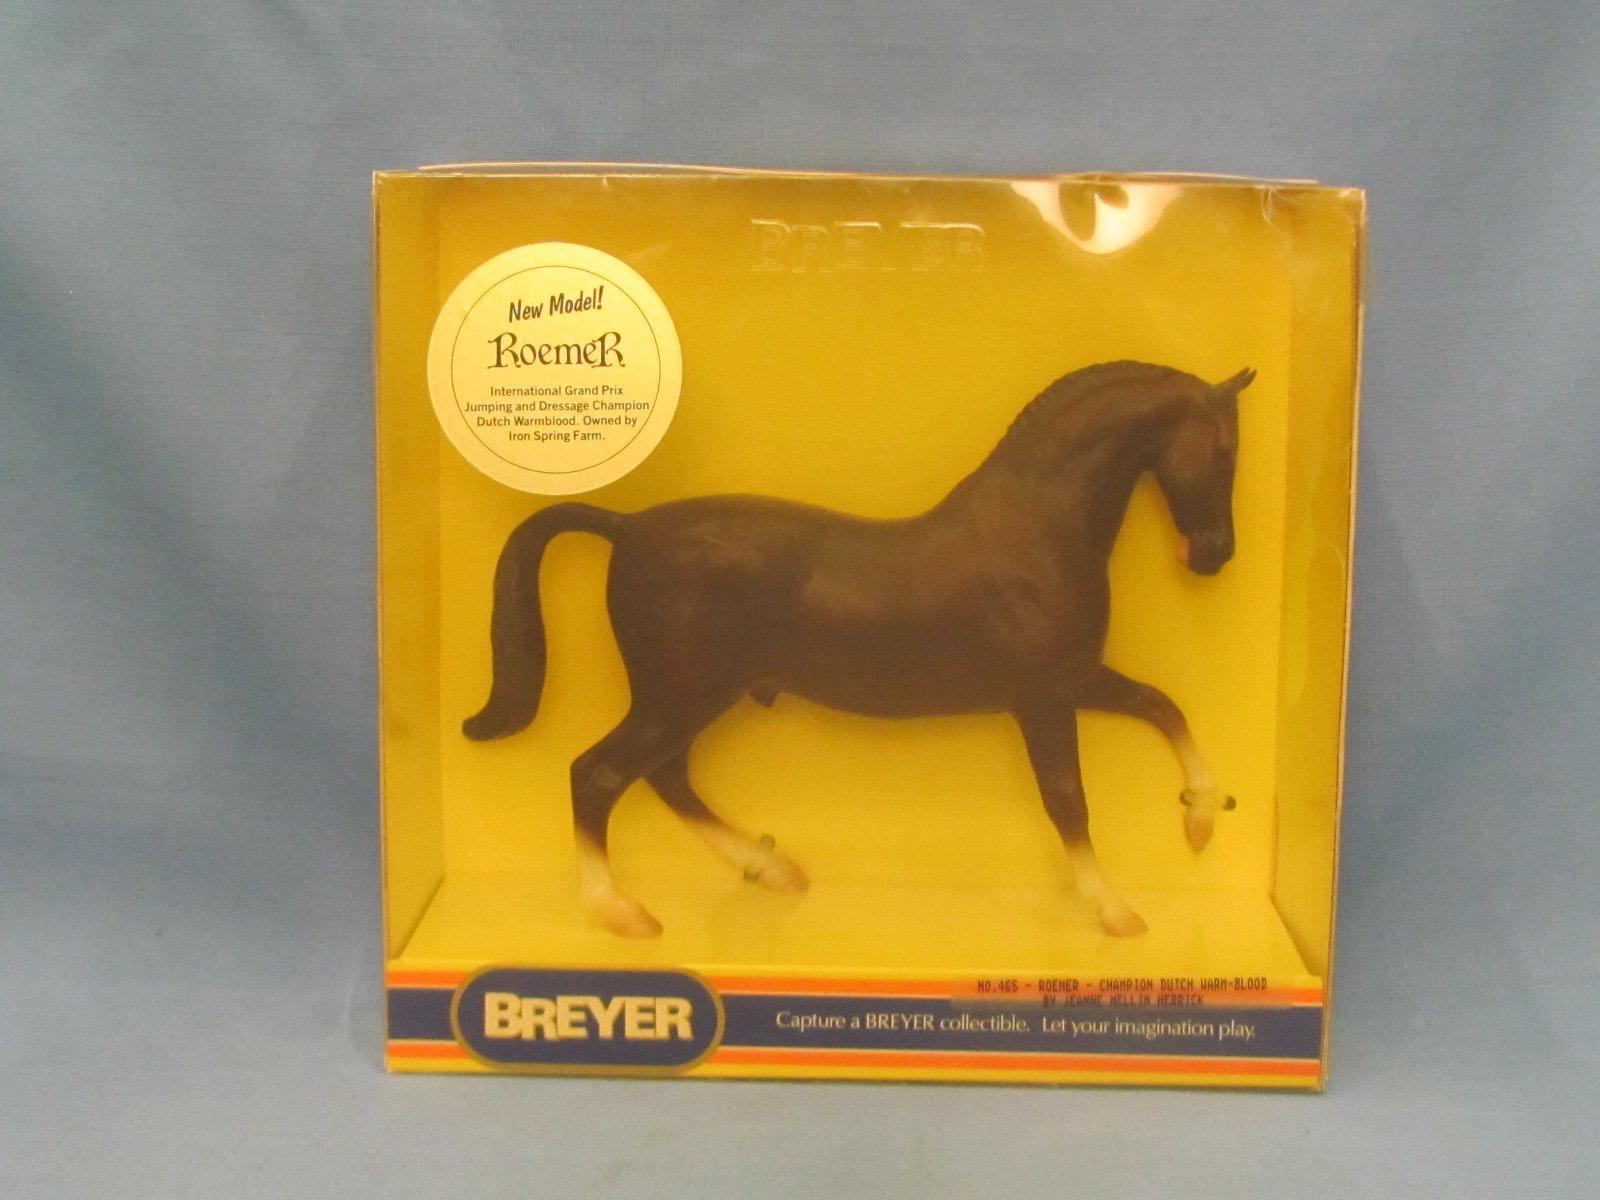 Breyer #465 Roemer Horse – New in Box – Dated 1988 – Box Has Light Wear – Plastic Cover Torn